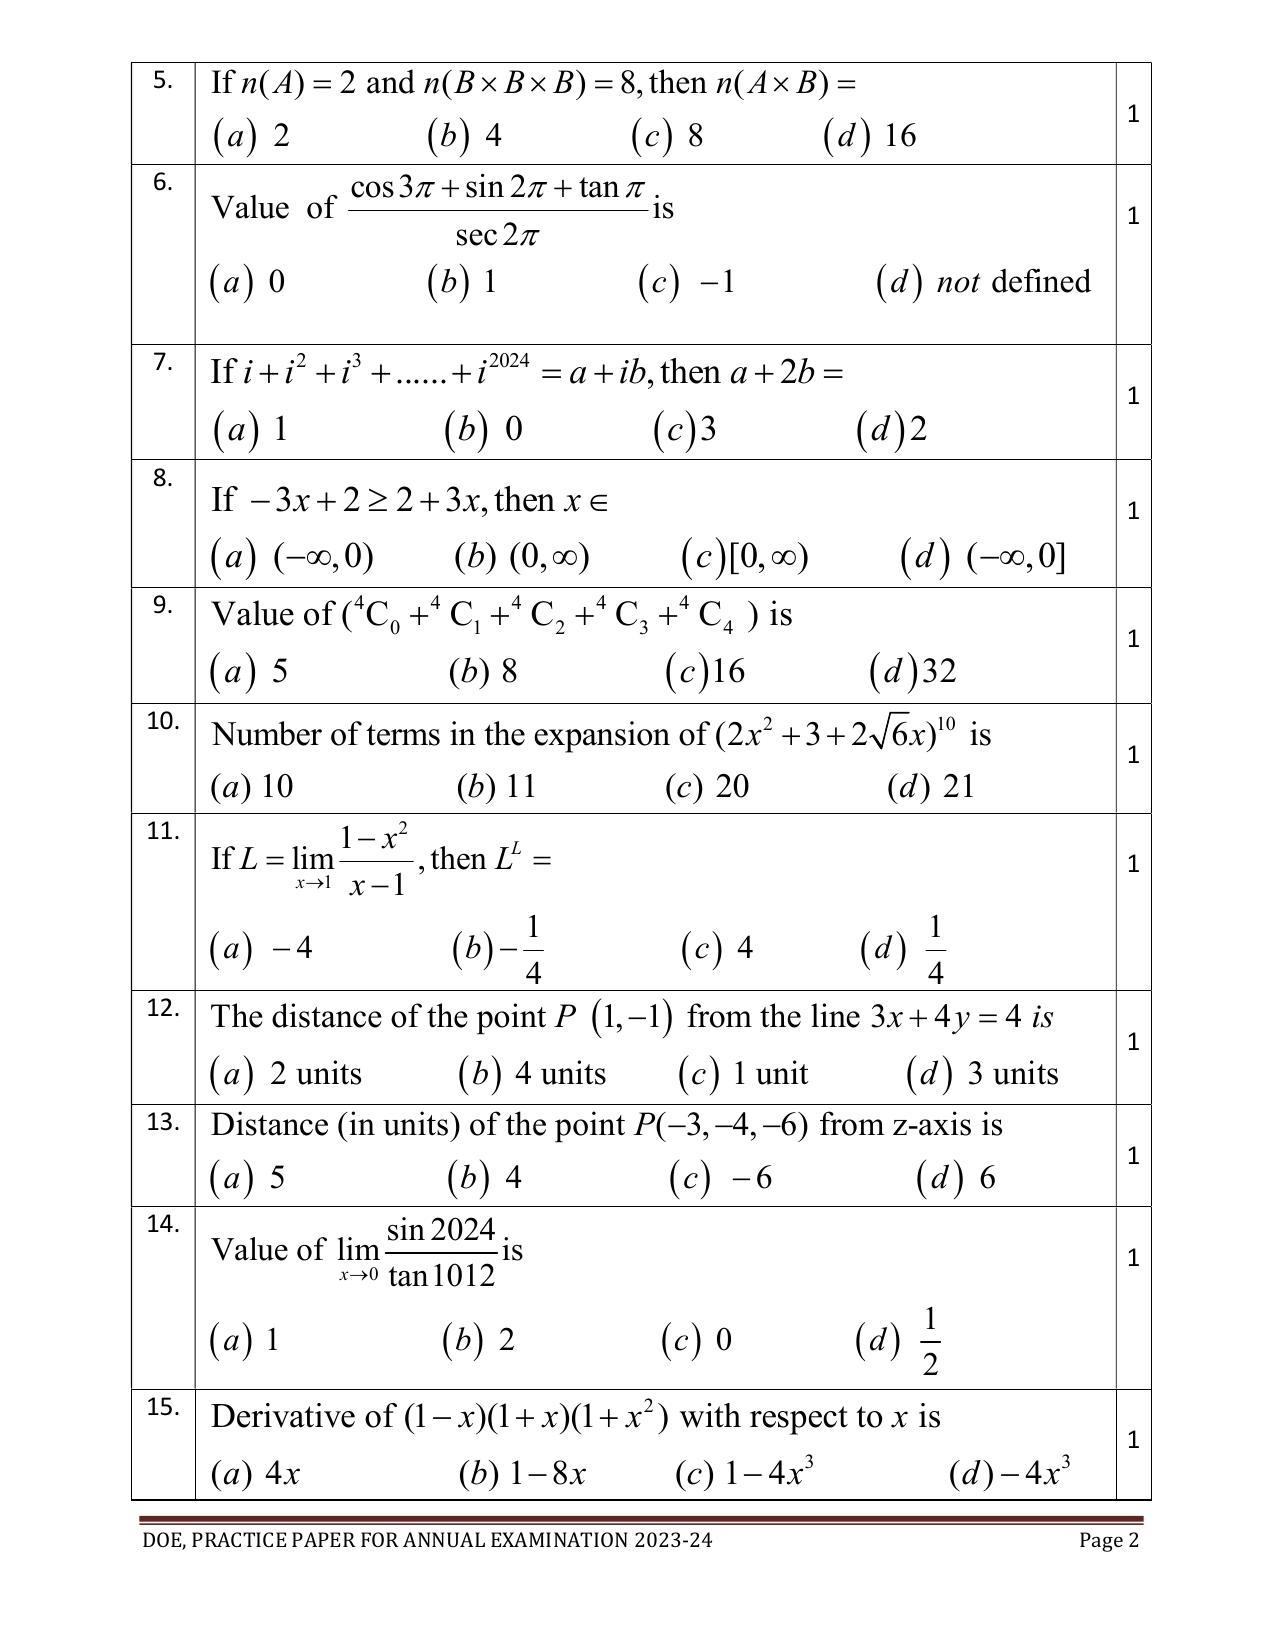 Edudel Class 11 Math (English) Practice Papers-2 (2023-24) - Page 2